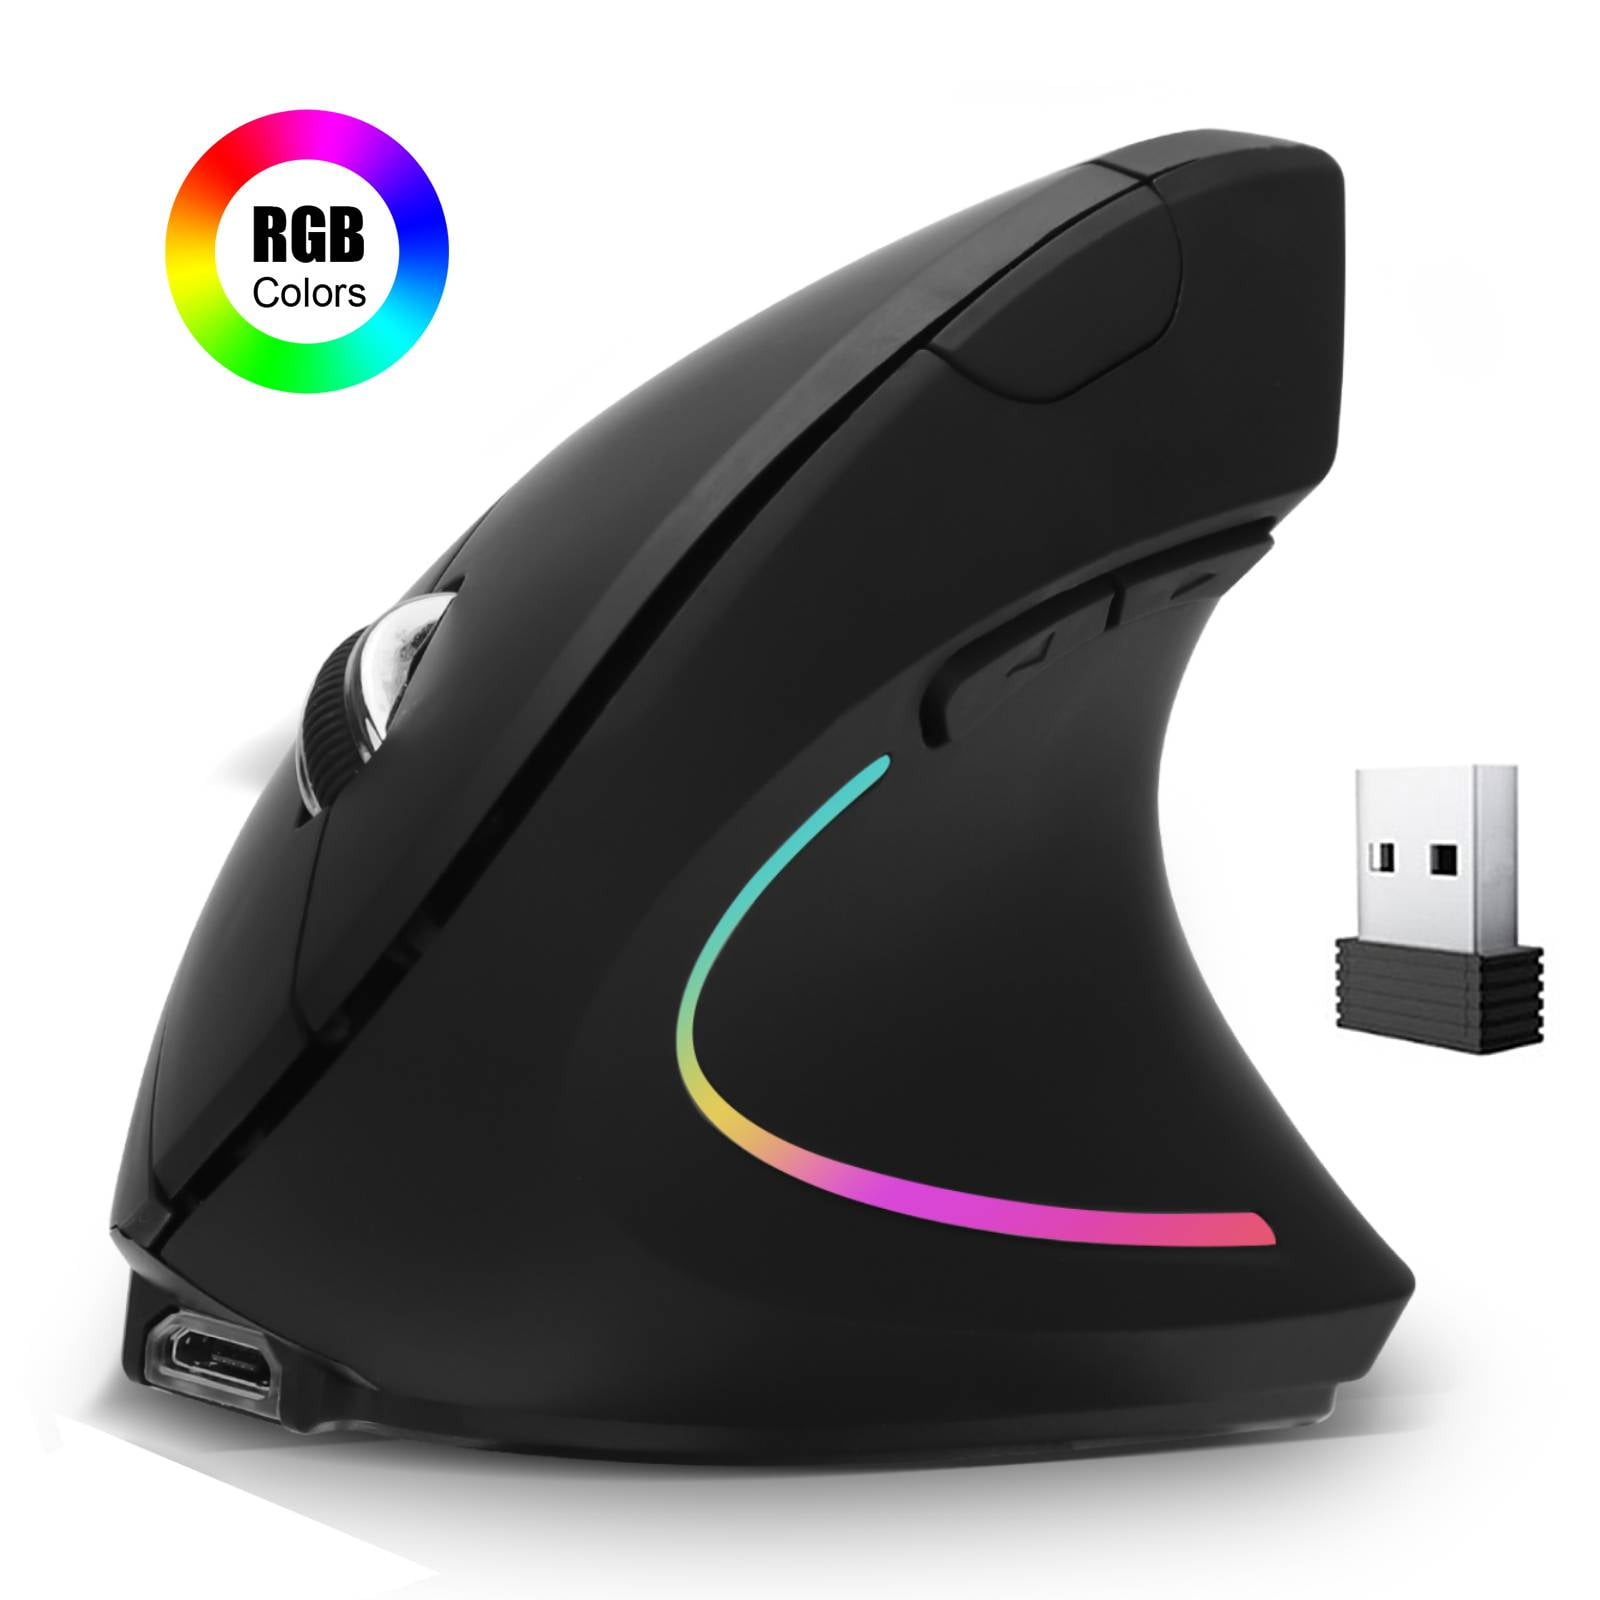 2.4G Ergonomic Portable USB Wireless Mouse for PC Computer Laptop Magnolia Spring Flowers Notebook with Nano Receiver